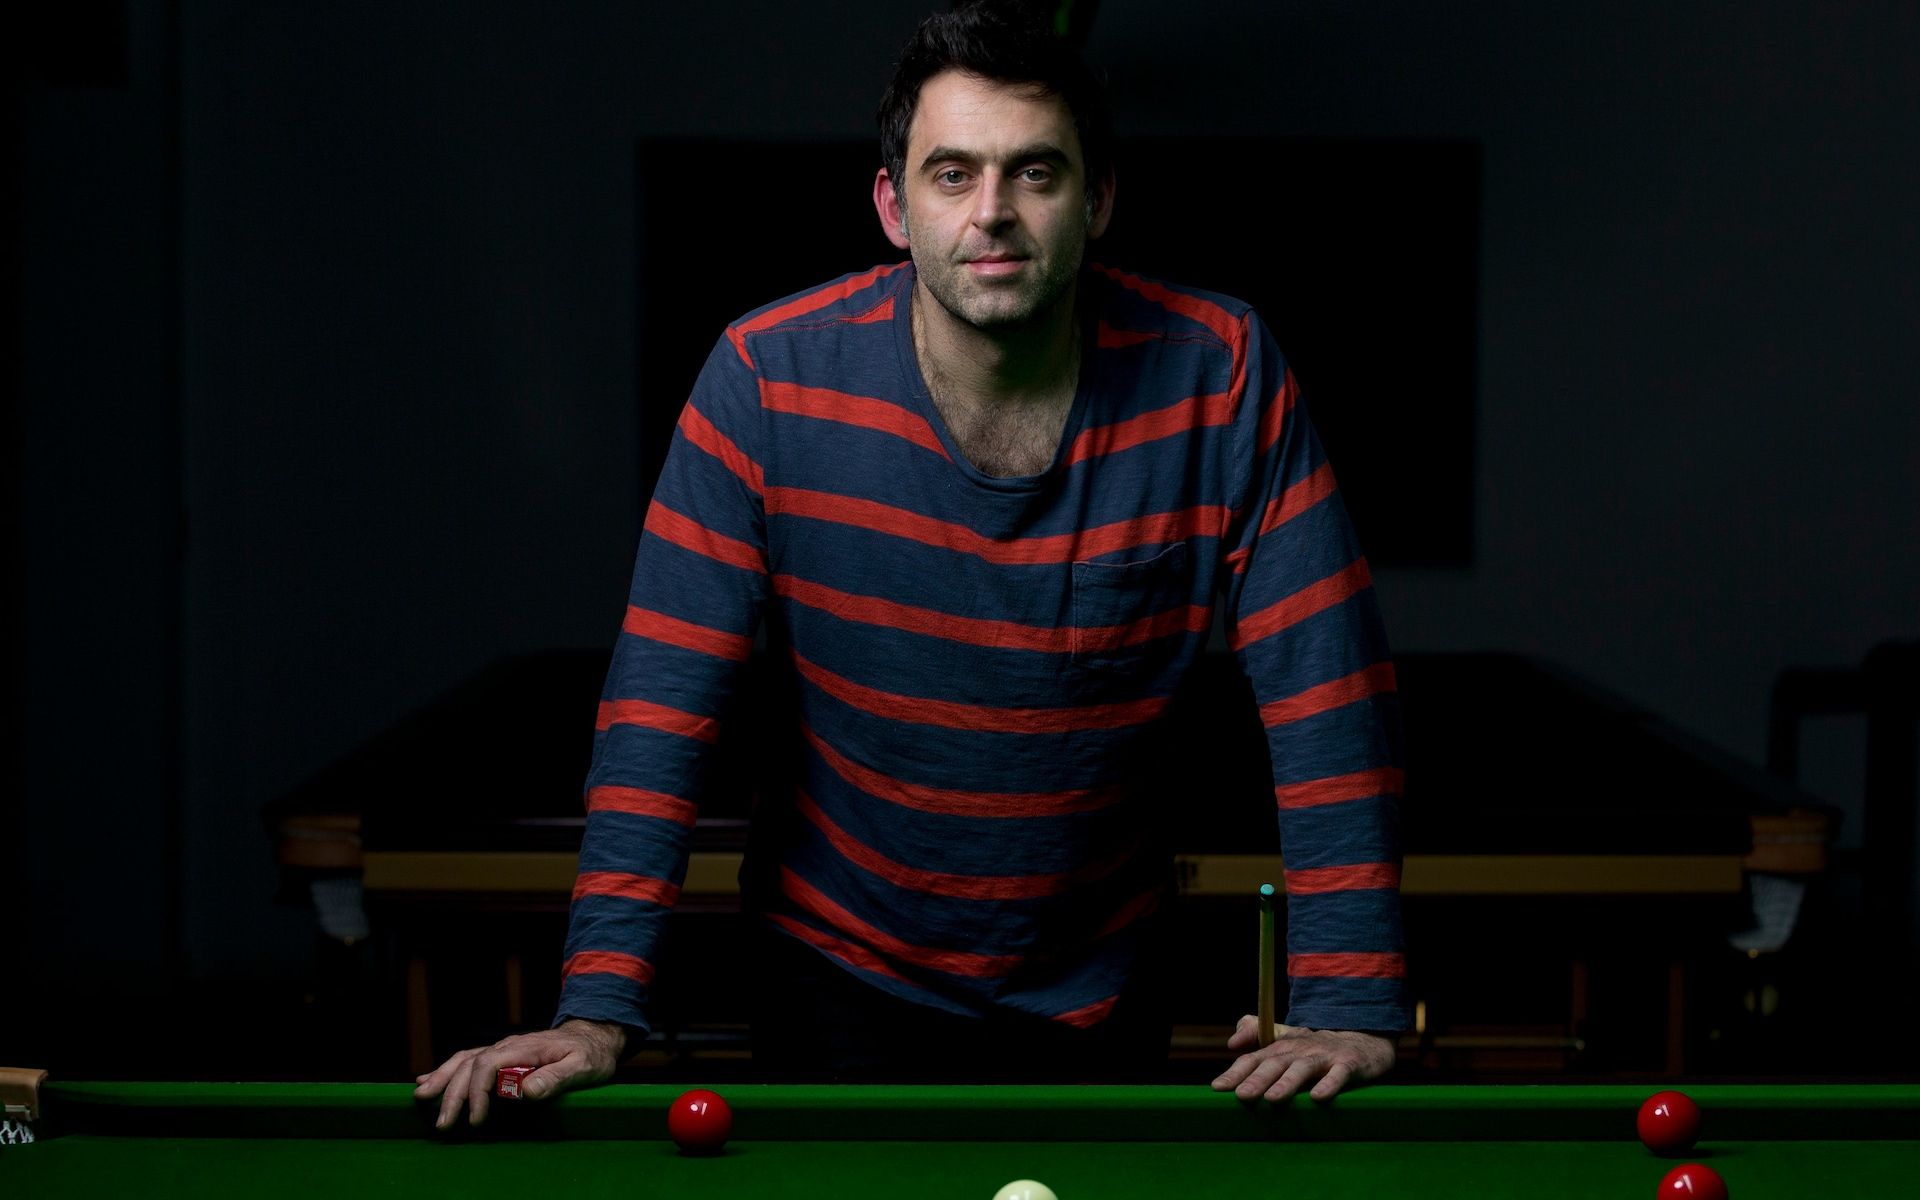 Renegade Ronnie O'Sullivan looks for a life beyond the baize. Ronnie o'sullivan, Have a laugh, Snooker